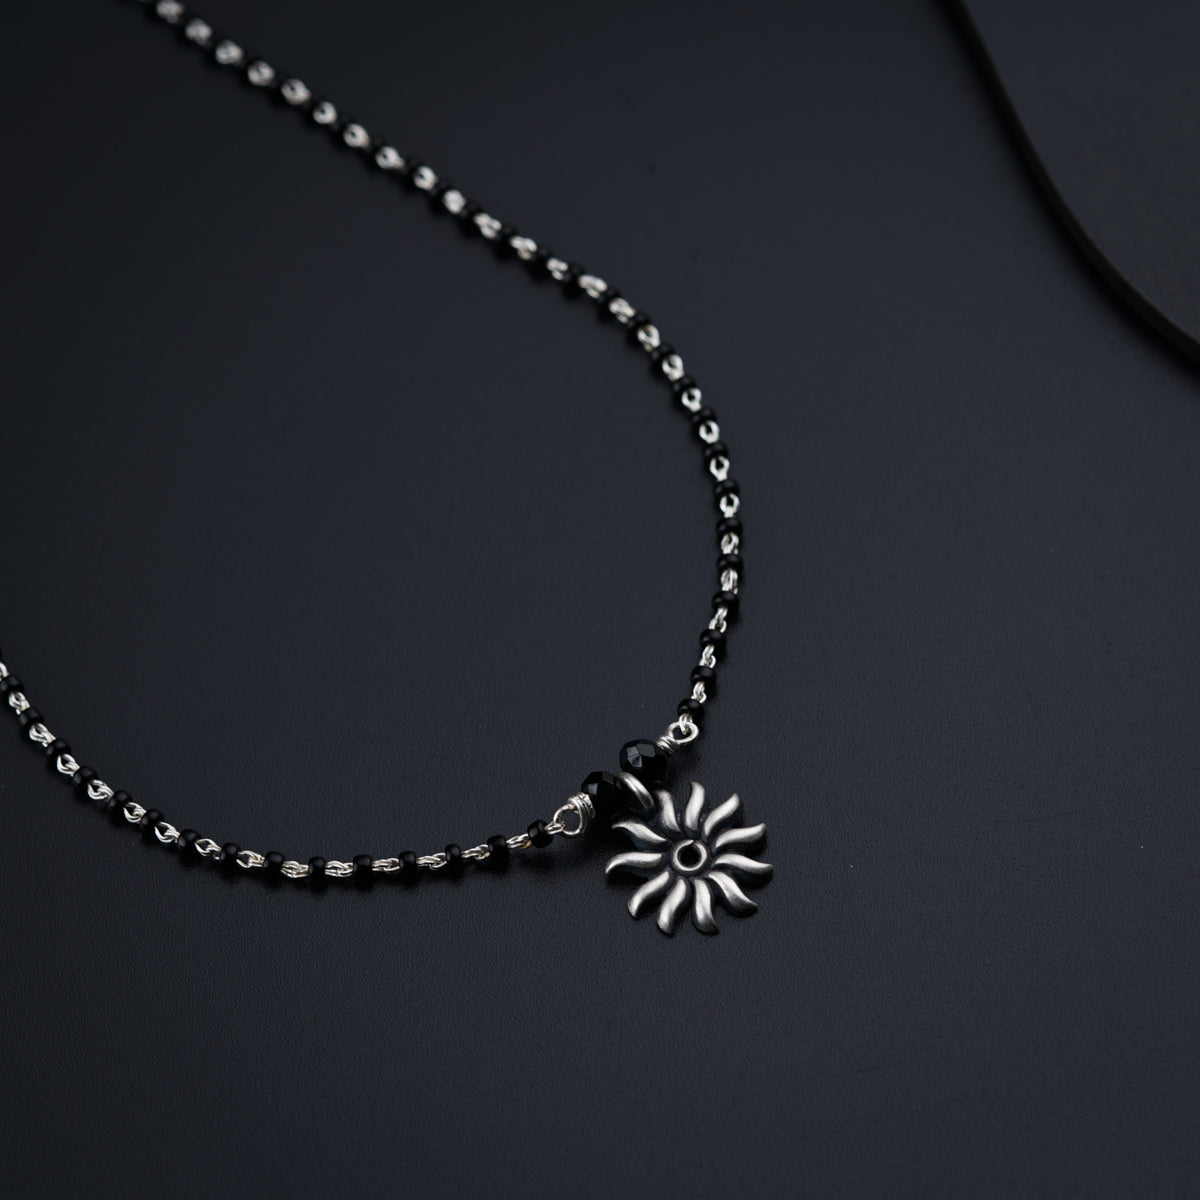 a necklace with a flower on a chain